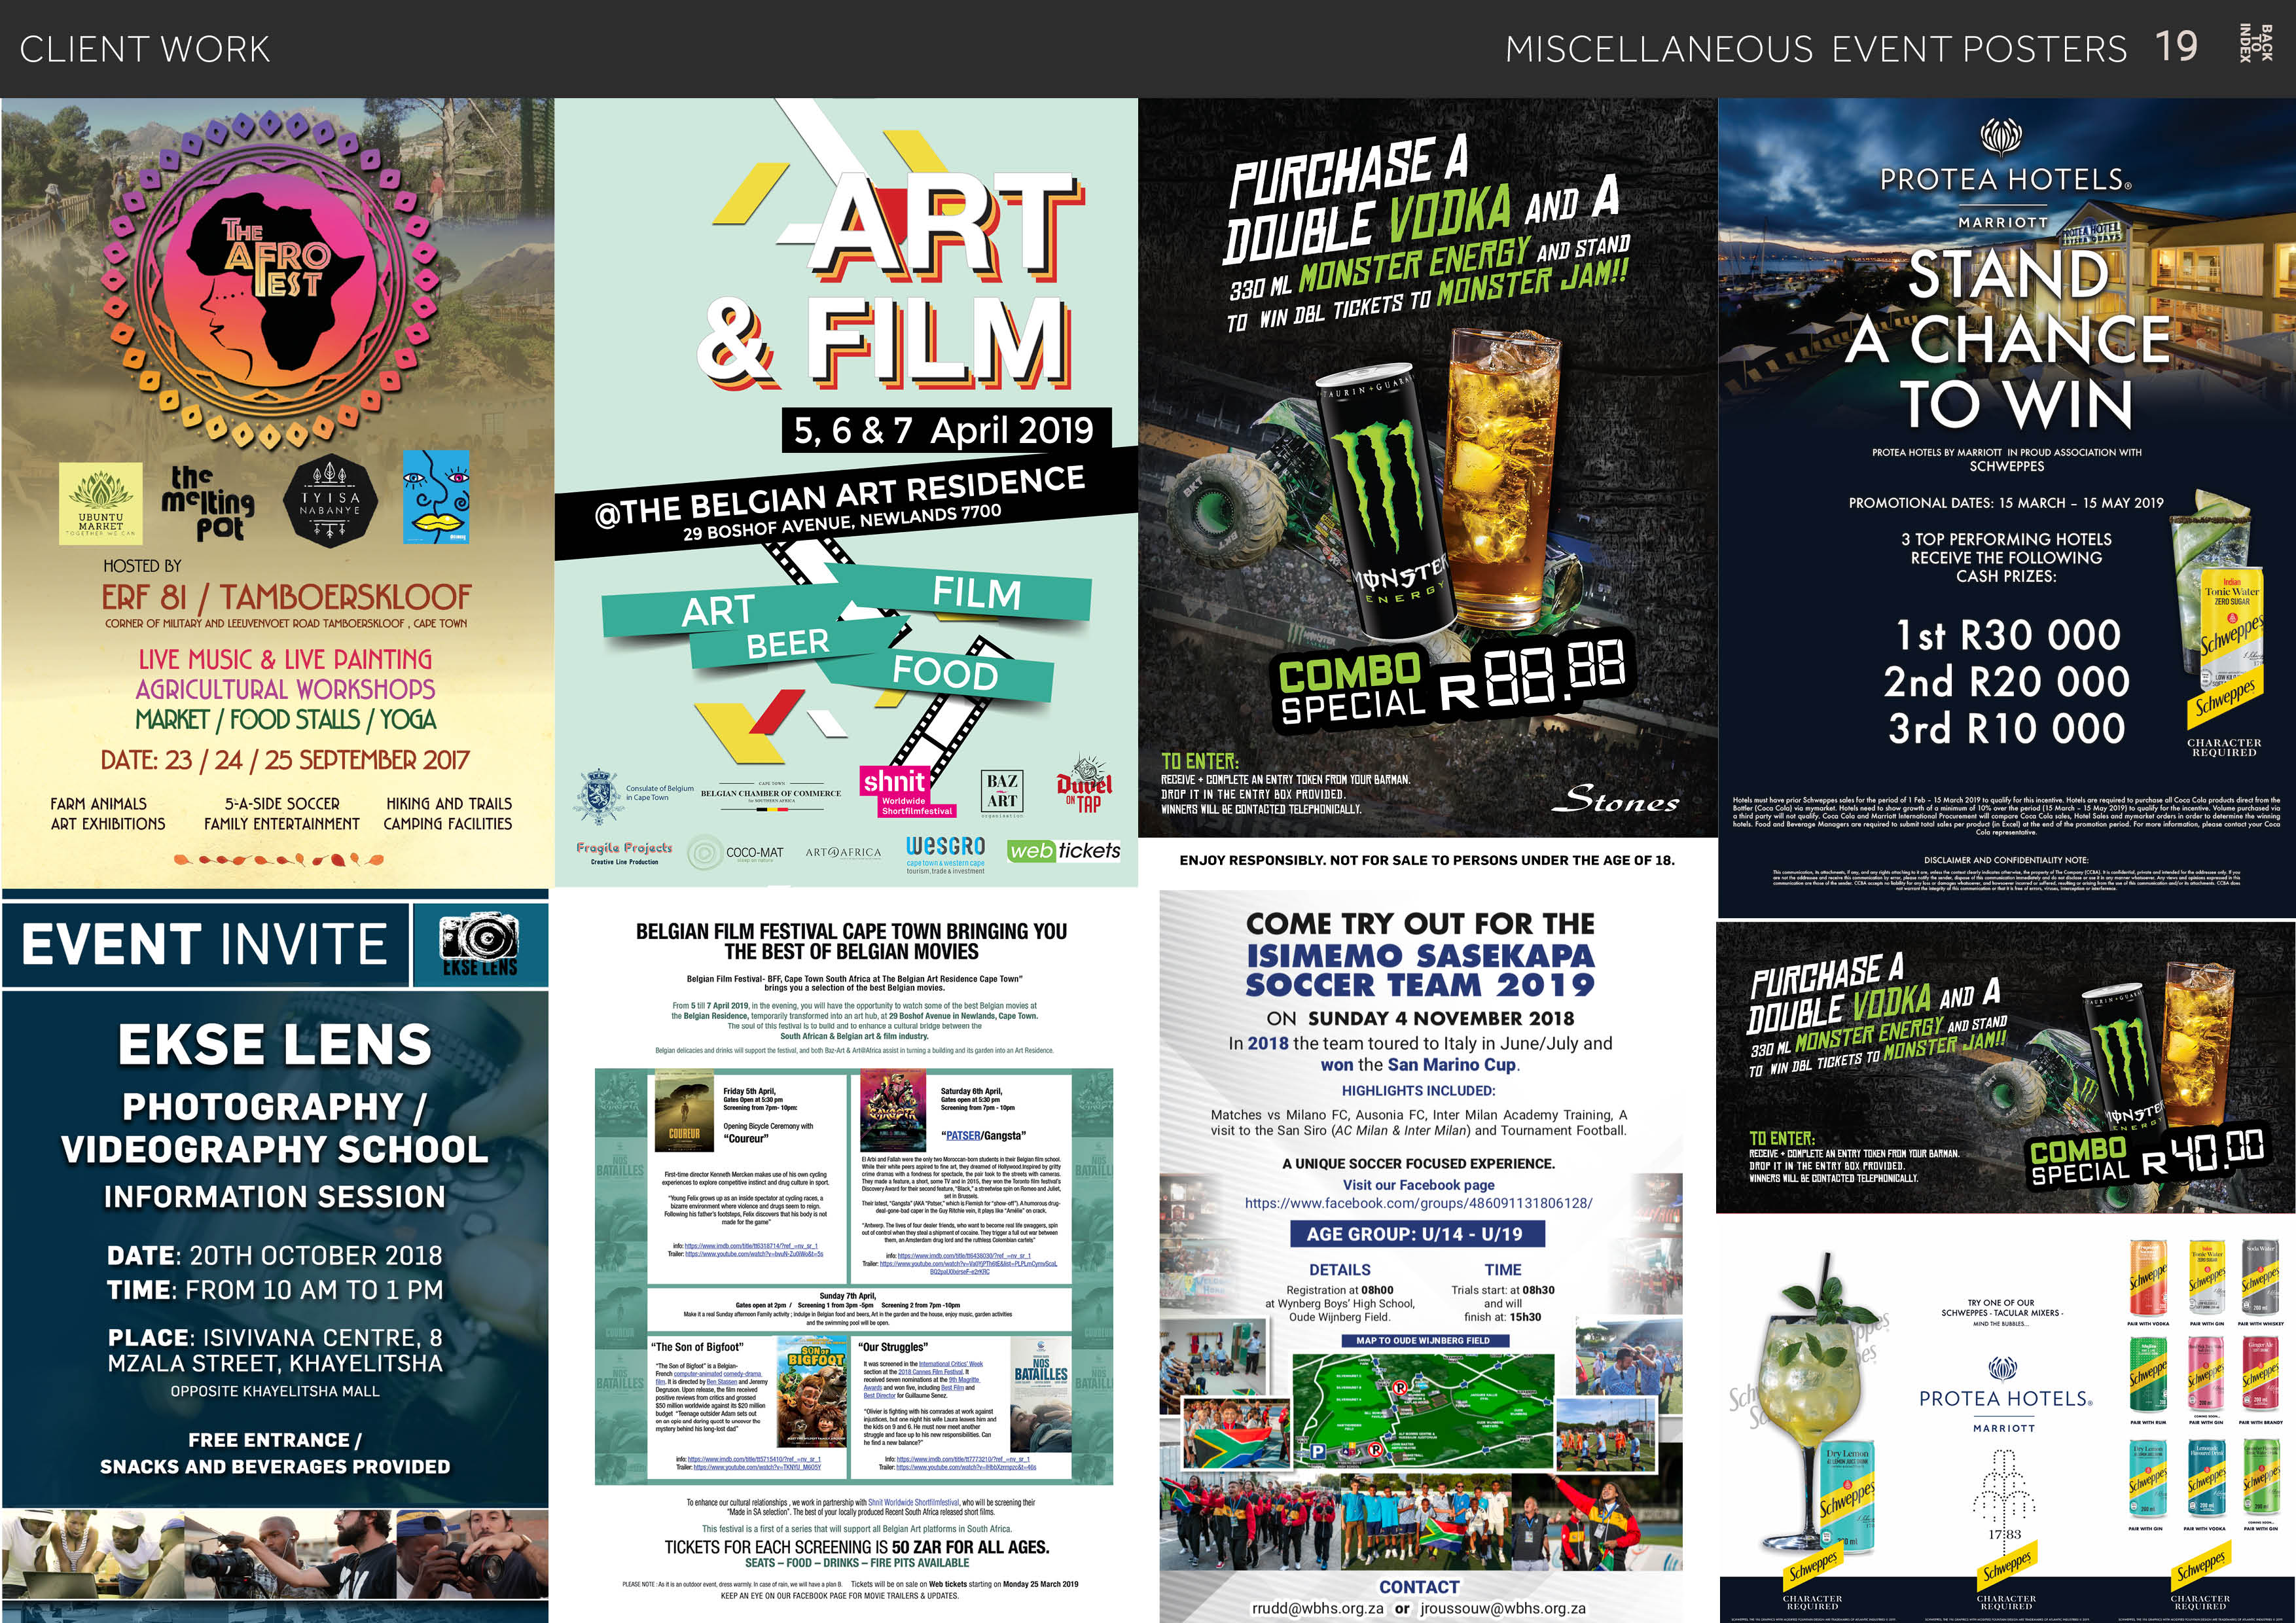 X3aNI
ol
nova

CLIENT WORK MISCELLANEOUS EVENT POSTERS 19

  
 
  
    
   
     
   

 

{WE

iL
THE aE
I

-
Es

  
    

HASE A ; 5 TT
FLRG a 1

Ee

oJ

7 @ 5 1h me

TO WIN

PROTEA HOTELS BY MARRIOTT IN PROUD ASSOCIATION WITH
SCHWEPPES

<u plL)Y)

5,6 & 7 April 2019

IDENCE
QTHE BELGIAN ART RESID
yA

WE
9 BOSHOF AVEN!

J Q

    

PROMOTIONAL DATES: 15 MARCH - 15 MAY 2019 | 8

  
 
  

3 TOP PERFORMING HOTELS
RECEIVE THE FOLLOWING
CASH PRIZES:

1st R30 000

    

Q EY

ERF 81 / TAMBOERSKLOOF Cara]
RE CLE ON
ioe

         

LIVE MUSIC & LIVE PAINTING
AGRICULTURAL WORKSHOPS 2nd R20 000

MARKET / FOOD STALLS / YOGA ) y 3rd R10 000 ¥*
DATE: 23 / 24 / 25 SEPTEMBER 2017 » \ & Ee fo

i BAZ = RECEIVE » CONPLETE AN ENTRY TOXEN FRDN TOUR BARMAN 2
FARM ANIMALS 5-A-SIDE SOCCER HIKING AND TRAILS x en SL RR we [ART] SYRP pel RT TE Stones
ART EXHIBITIONS FAMILY ENTERTAINMENT CAMPING FACILITIES :
WesGRO tickets

     
     
 
   

eso sels

i®) BELGIAN FILM FESTIVAL CAPE TOWN BRINGING YOU COME TRY OUT FOR THE
(AV) NT INVITE THE BEST OF BELGIAN MOVIES ISIMEMO SASEKAPA oq re
os - SOCCER TEAM 2019 PLRCHA PE

ON SUNDAY 4 NOVEMBER 2018 pou mii AND A

ENJOY RESPONSIBLY. NOT FOR SALE TO PERSONS UNDER THE AGE OF 18.

 

  
 
  

  

 
  
 
 

   
  
  
  

   
  
 
 
     

3 A LiL |
3 KS 3 B 3 | S In 2018 the team toured to Italy in June/July and PL IITA Ne TL a i
- " won the San Marino Cup ys iar re os -
adil pombe on to HIGHLIGHTS INCLUDED: A iN 17 ¥
PH OTOG RAP he / i Matches vs Milano FC, Ausonia FC, Inter n Academy Training, A Se) ON NTA .
es Toa RARE

   
  

« - visit to the San Siro (AC Milan & Inter Milan d Tournament Football
PATSER/Gangsta ‘ ) LE

VIDEOGRAPHY SCHOOL Le — VTE yy oo

INFORMATION SESSION

  
 
 
 

Lit A UNIQUE SOCCER FOCUSED EXPERIENCE. DROP IT IM THE ENTRY BOX PROVIDED.
a Visit our Facebook page shod, FI y SL

https://www.facebook.com/groups/486091131806128/
4 = AGE GROUP: U/14 - U/19

 
 
 
 

    
        
 
 

DATE: 20TH OCTOBER 2018
TIME: FROM 10 AM TO 1 PM
PLACE: ISIVIVANA CENTRE, 8 = 7 . ¥ SEE
MZALA STREET, KHAYELITSHA : re < Batkites | ) ; ot A i @
OPPOSITE KHAYELITSHA MALL : awl hia = =. a - PROTEA HOTELS

  

tes open st 2m 1

  
  

   

- —

 
 
   

    

FREE ENTRANCE /
SNACKS AND BEVERAGES PROVIDED

   

) NE Pra i or ie
—_— = ° t 4 3 Sk
wl w po < 0 p
: E27 TICKETS FOR EACH SCREENING IS 50 ZAR FOR ALL AGES. : "YH : ~
J W ~ SEATS - FOOD - DRINKS — FIRE PITS AVAILABLE > ® 20 i
POL S040 0 a etn ne ts starting on Mendny 25 Maren 2019 CONTACT

org.za or jroussouw@wbhs.org.za